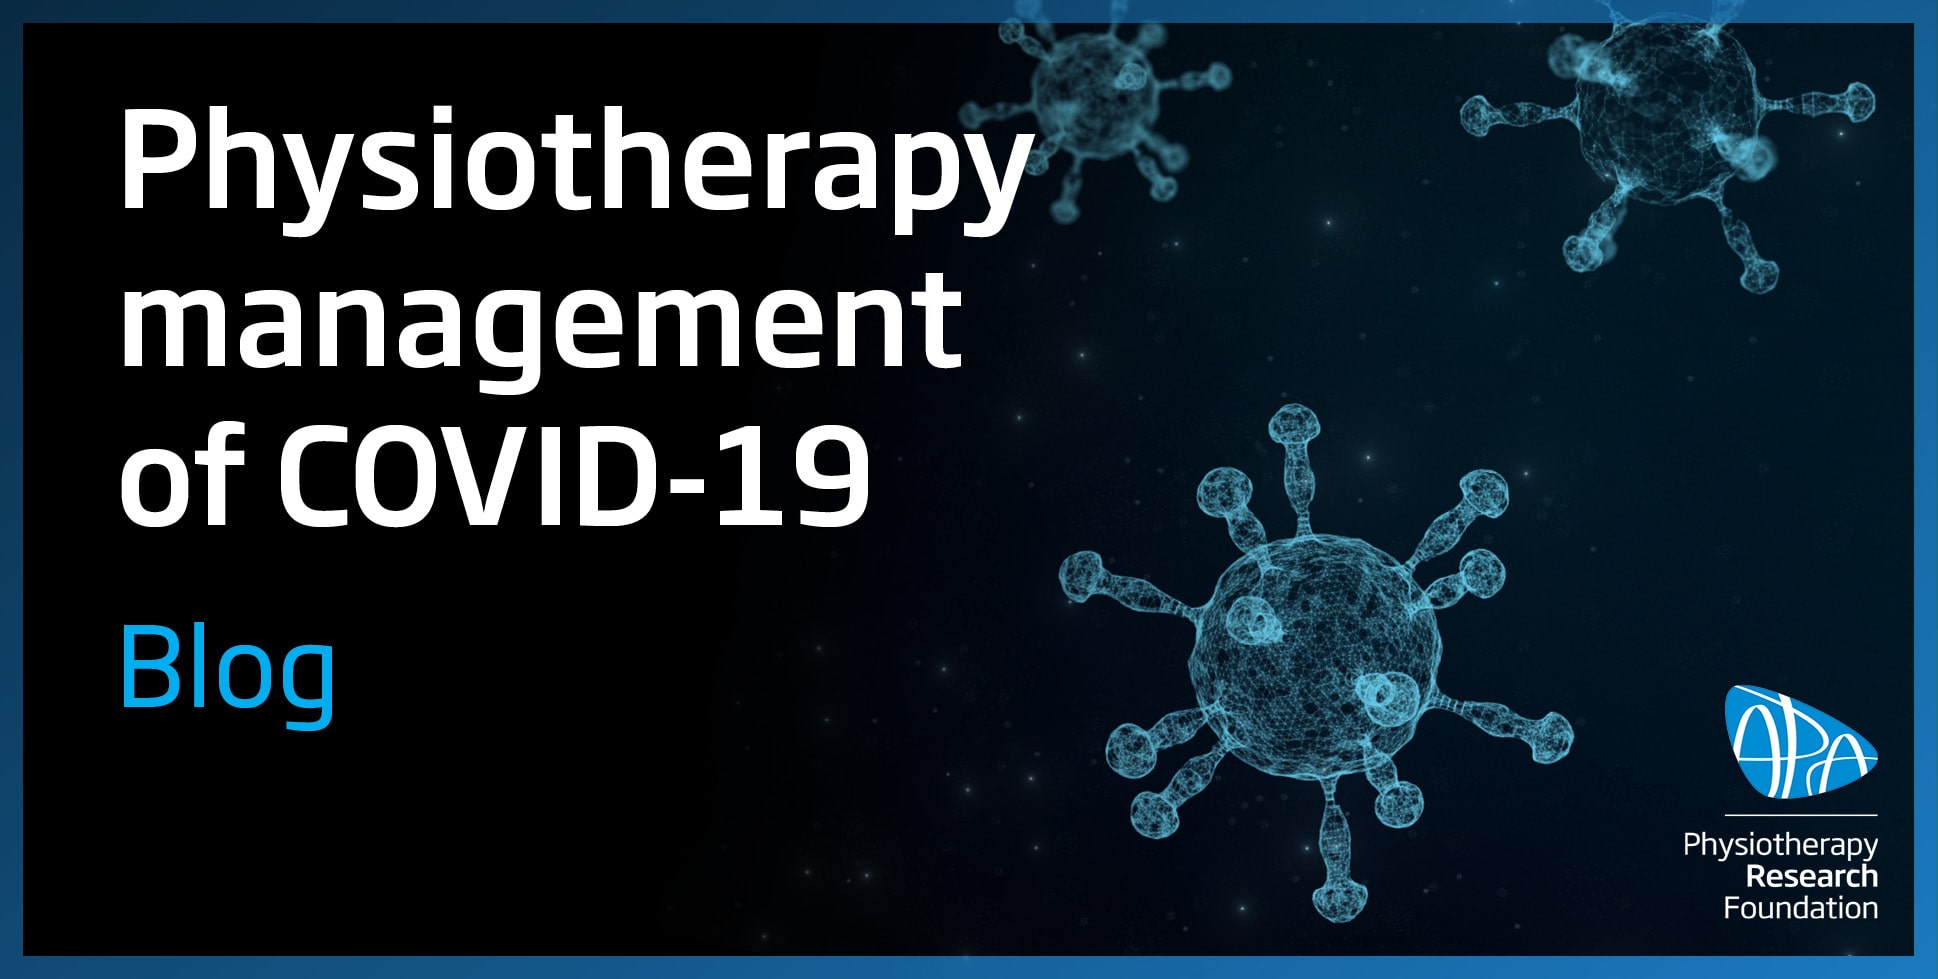 Physiotherapy management of COVID-19